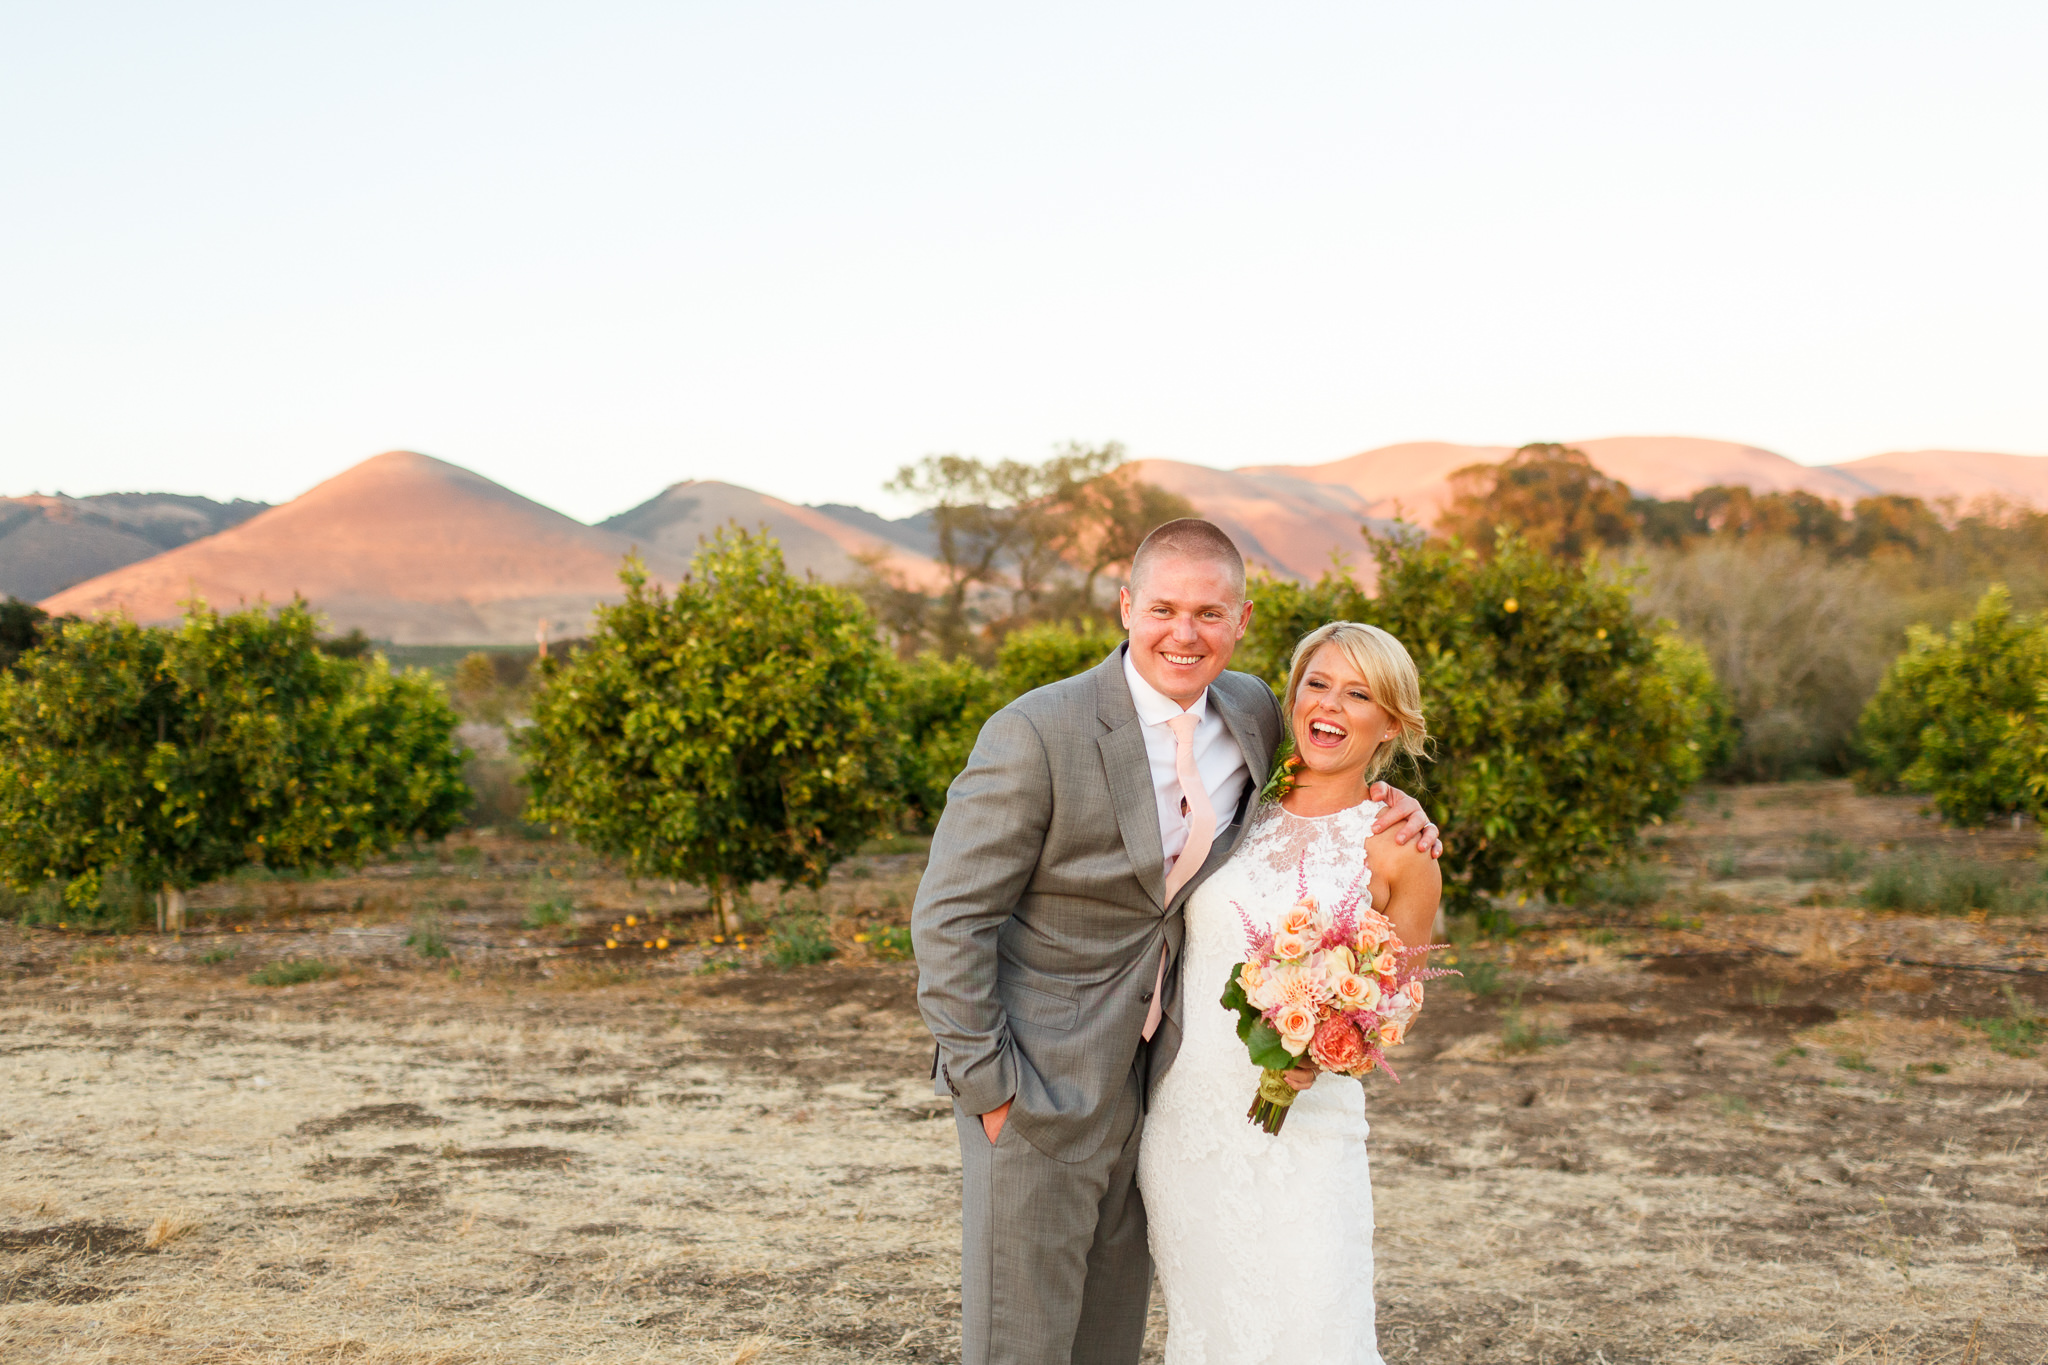 Bride and groom laughing together at sunset at Dana Powers Barn wedding